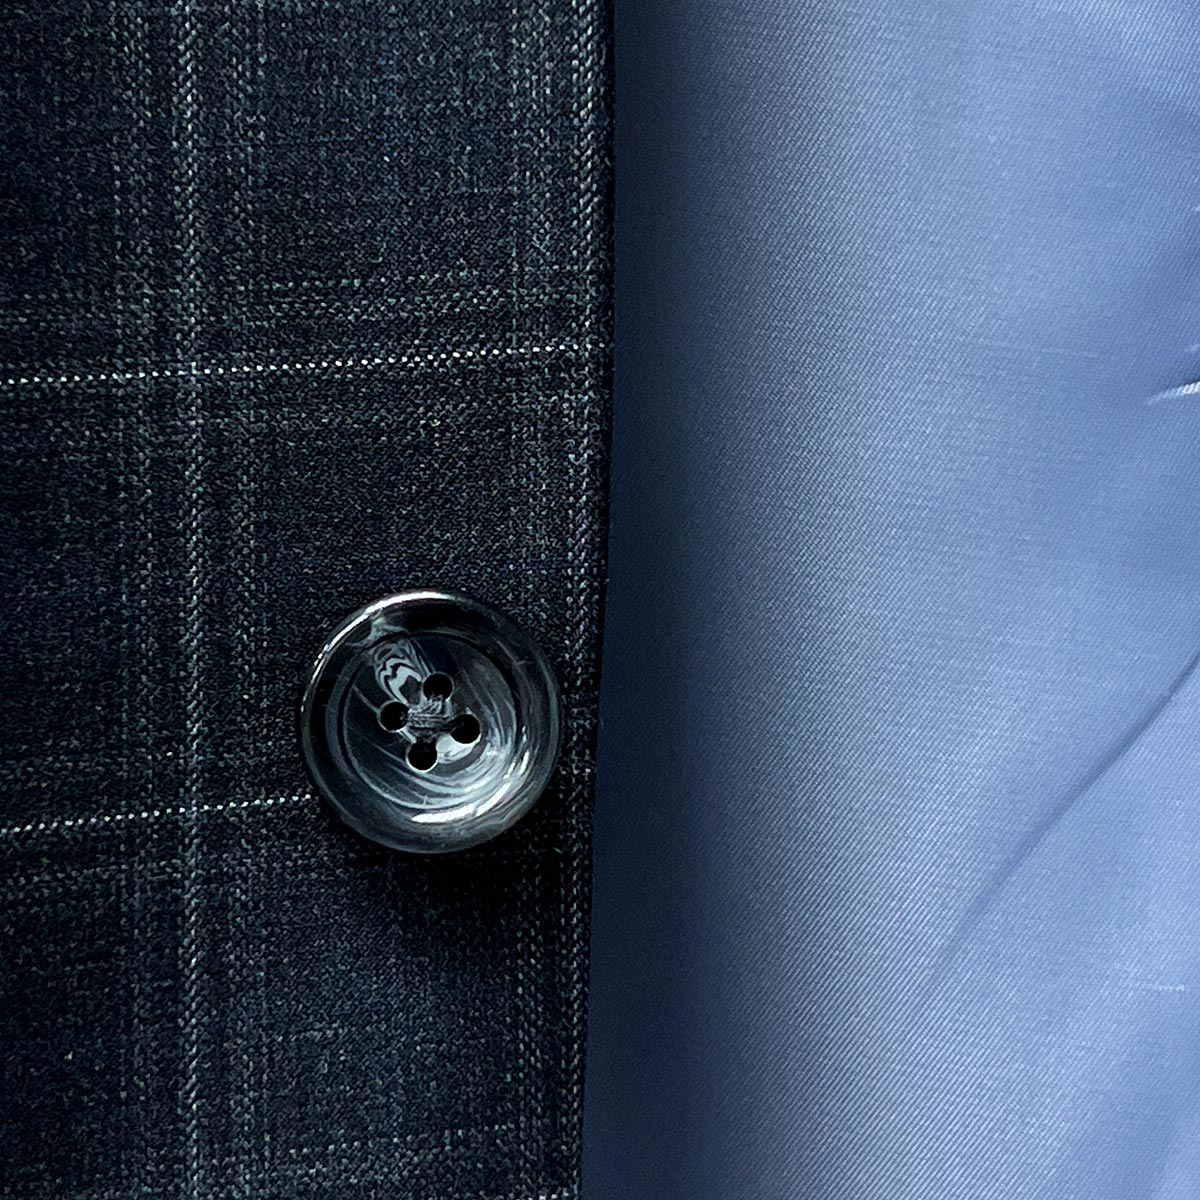 Horn buttons feature on Westwood Hart Grey Plaid Windowpane Men's 3pc Suit, Silk Bemberg Sky Blue Lining